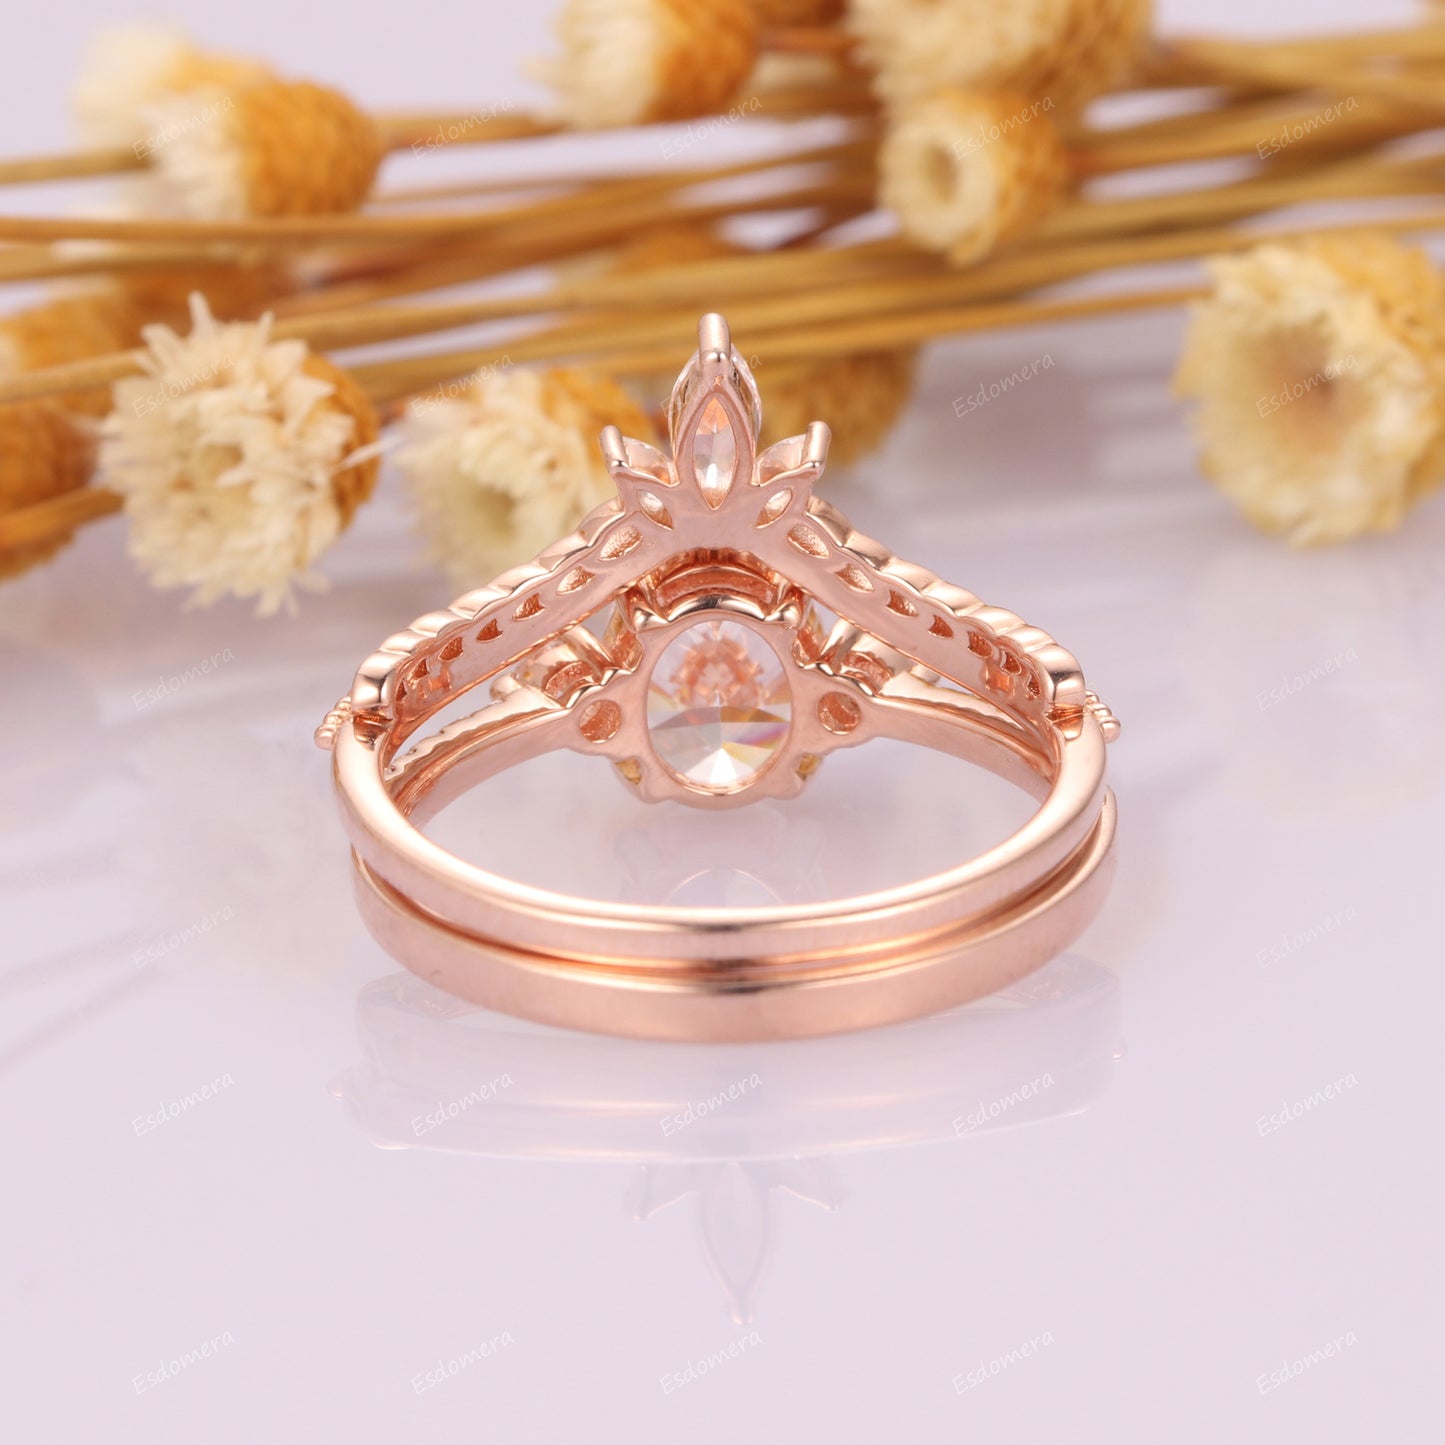 14k Rose Gold Moissanite Bridal Sets, Art Deco 1.5CT Oval Cut Moissanite Tapered Band Engagement Ring For Her, Vintage Curved Shaped Wedding Band